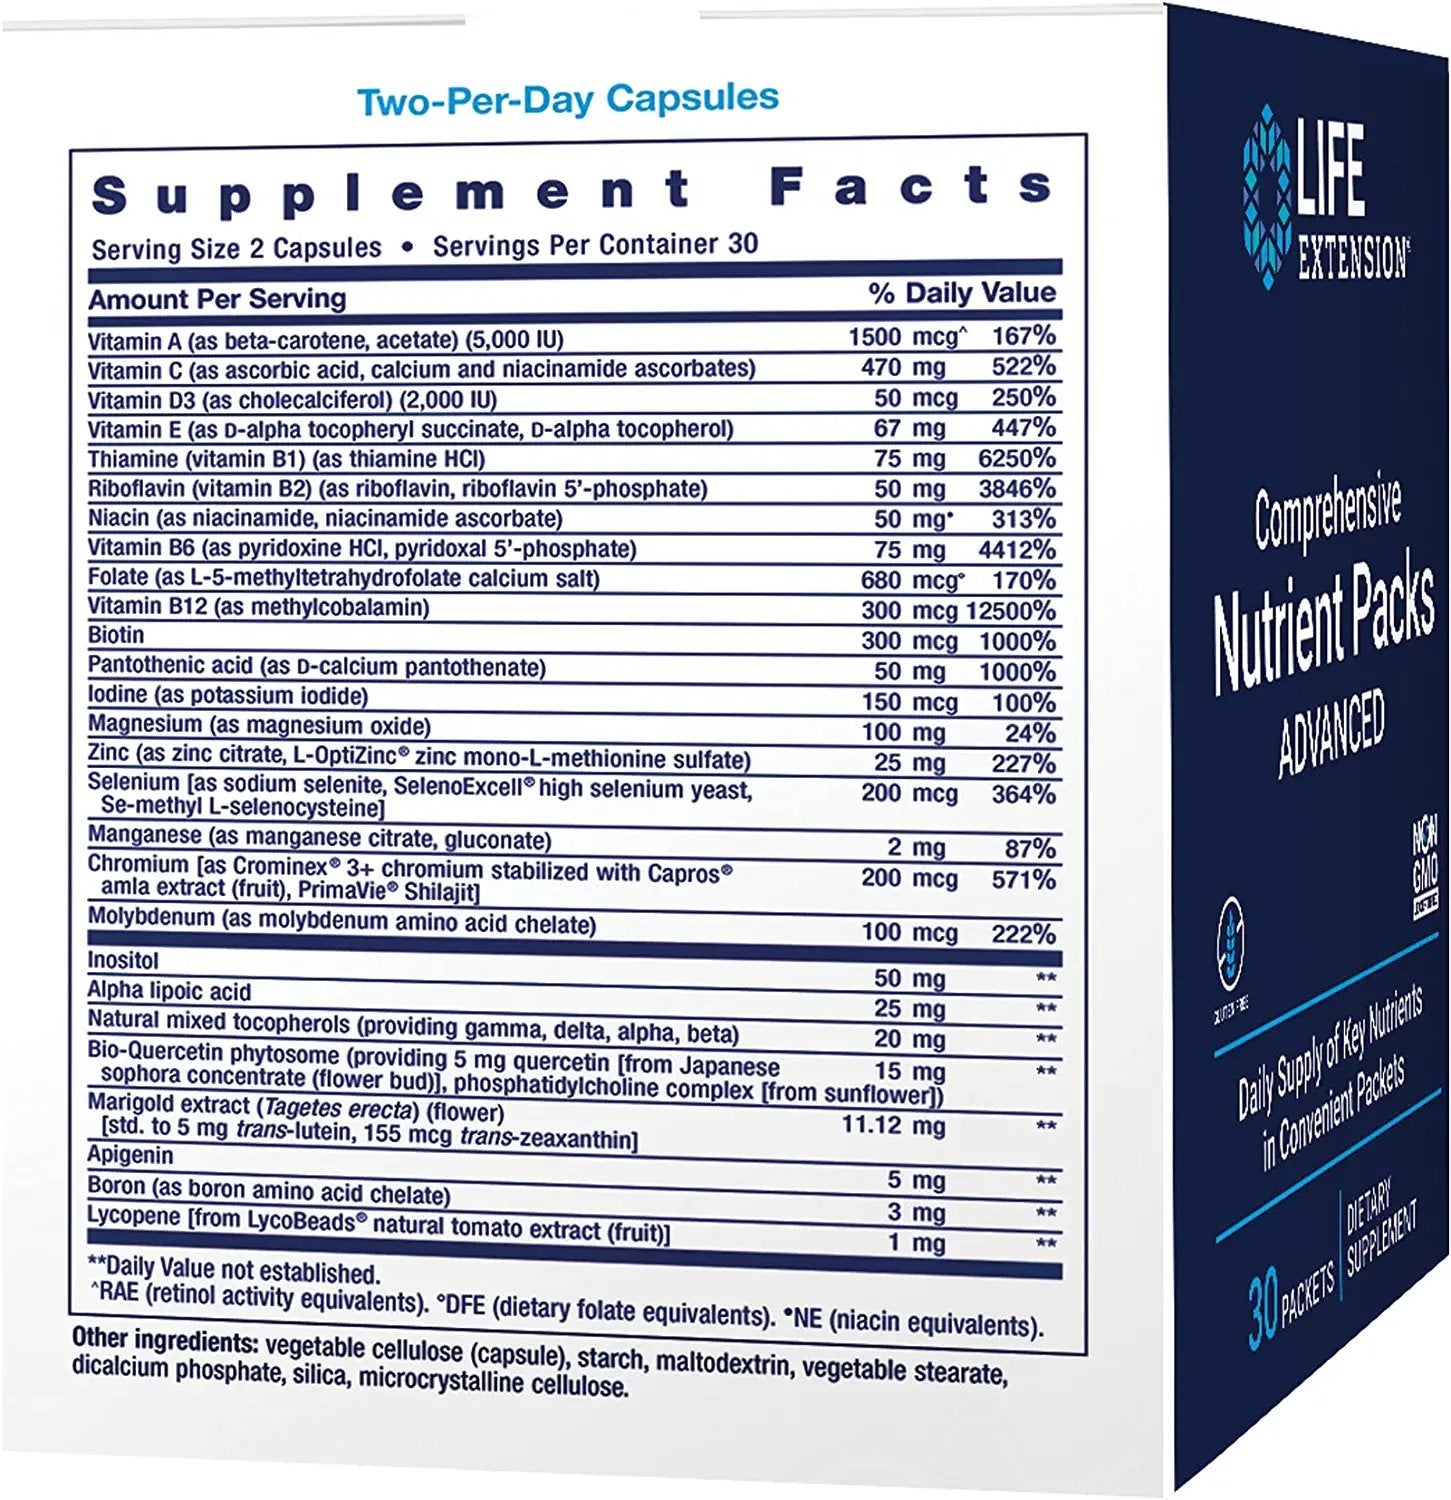 Life Extension Comprehensive Nutrient Packs Advanced - Oil-based Nutrients - Multivitamin & Minerals Supplements with Omega-3, CoQ10 For Health And Longevity – Gluten Free, Non-GMO - 30 Packets